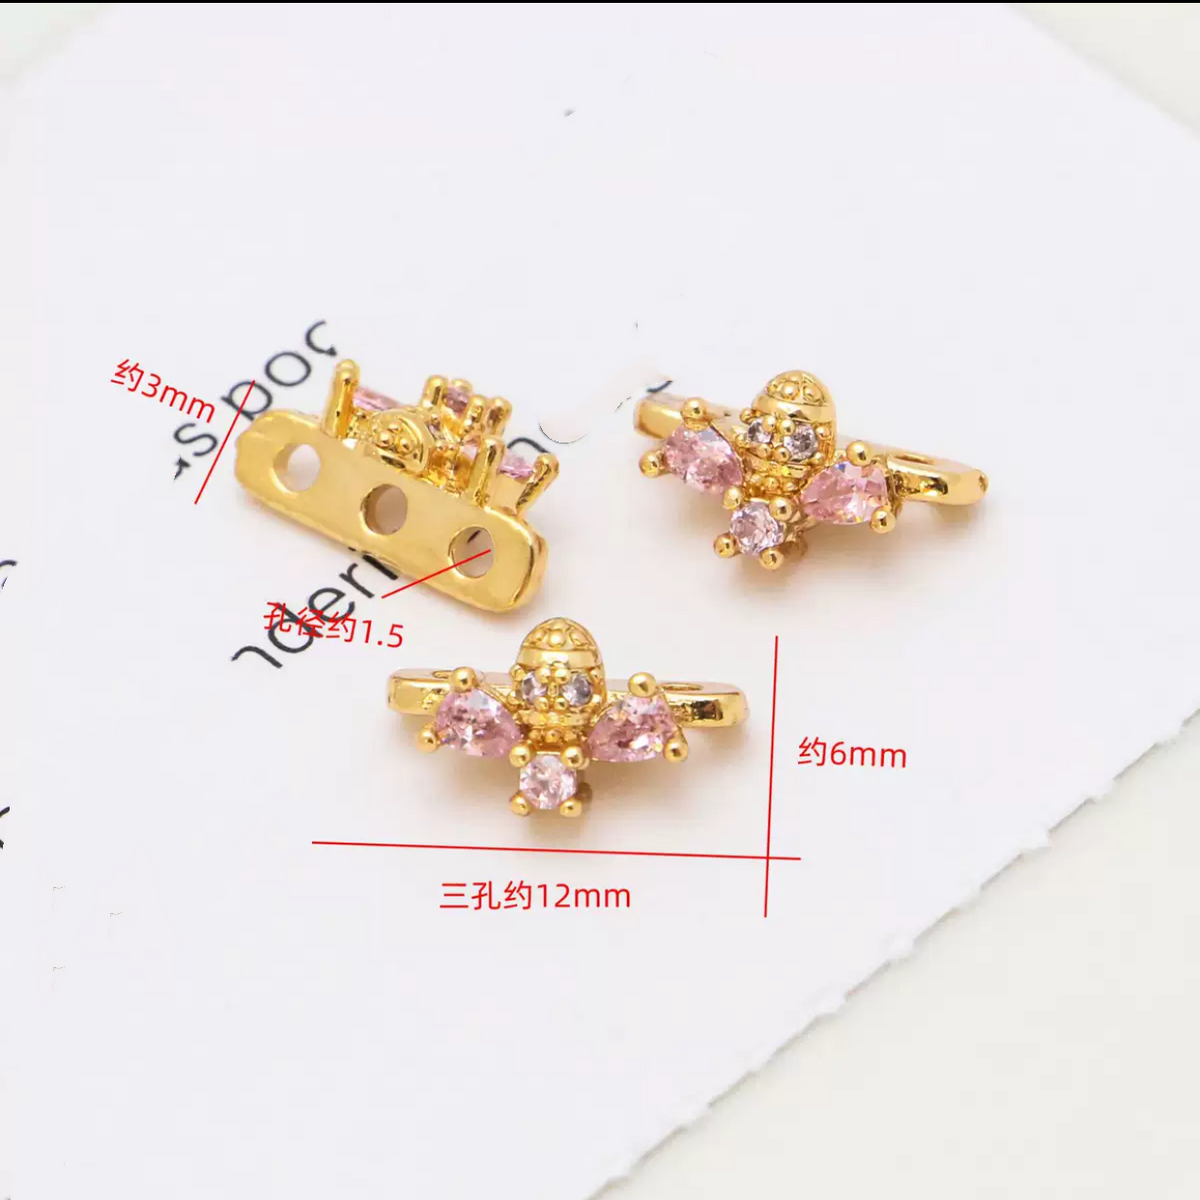 #T6 T7 T8 Three Holes Spacers Charms For DIY Jewelry Accessories